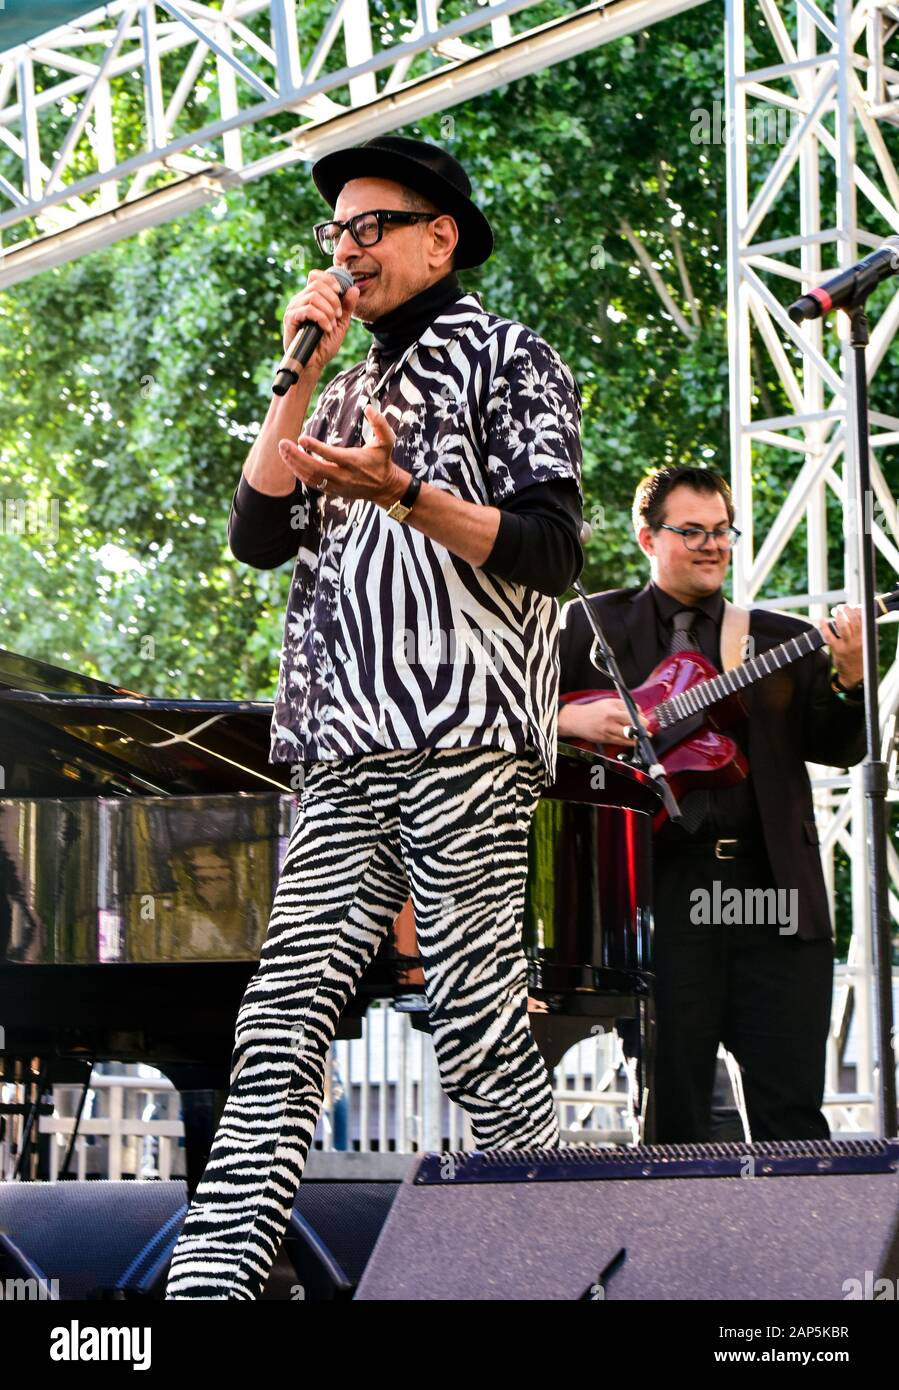 Jeff Goldbloom performing on stage at the BottleRock Festival 2019, Napa Valley, California. Stock Photo